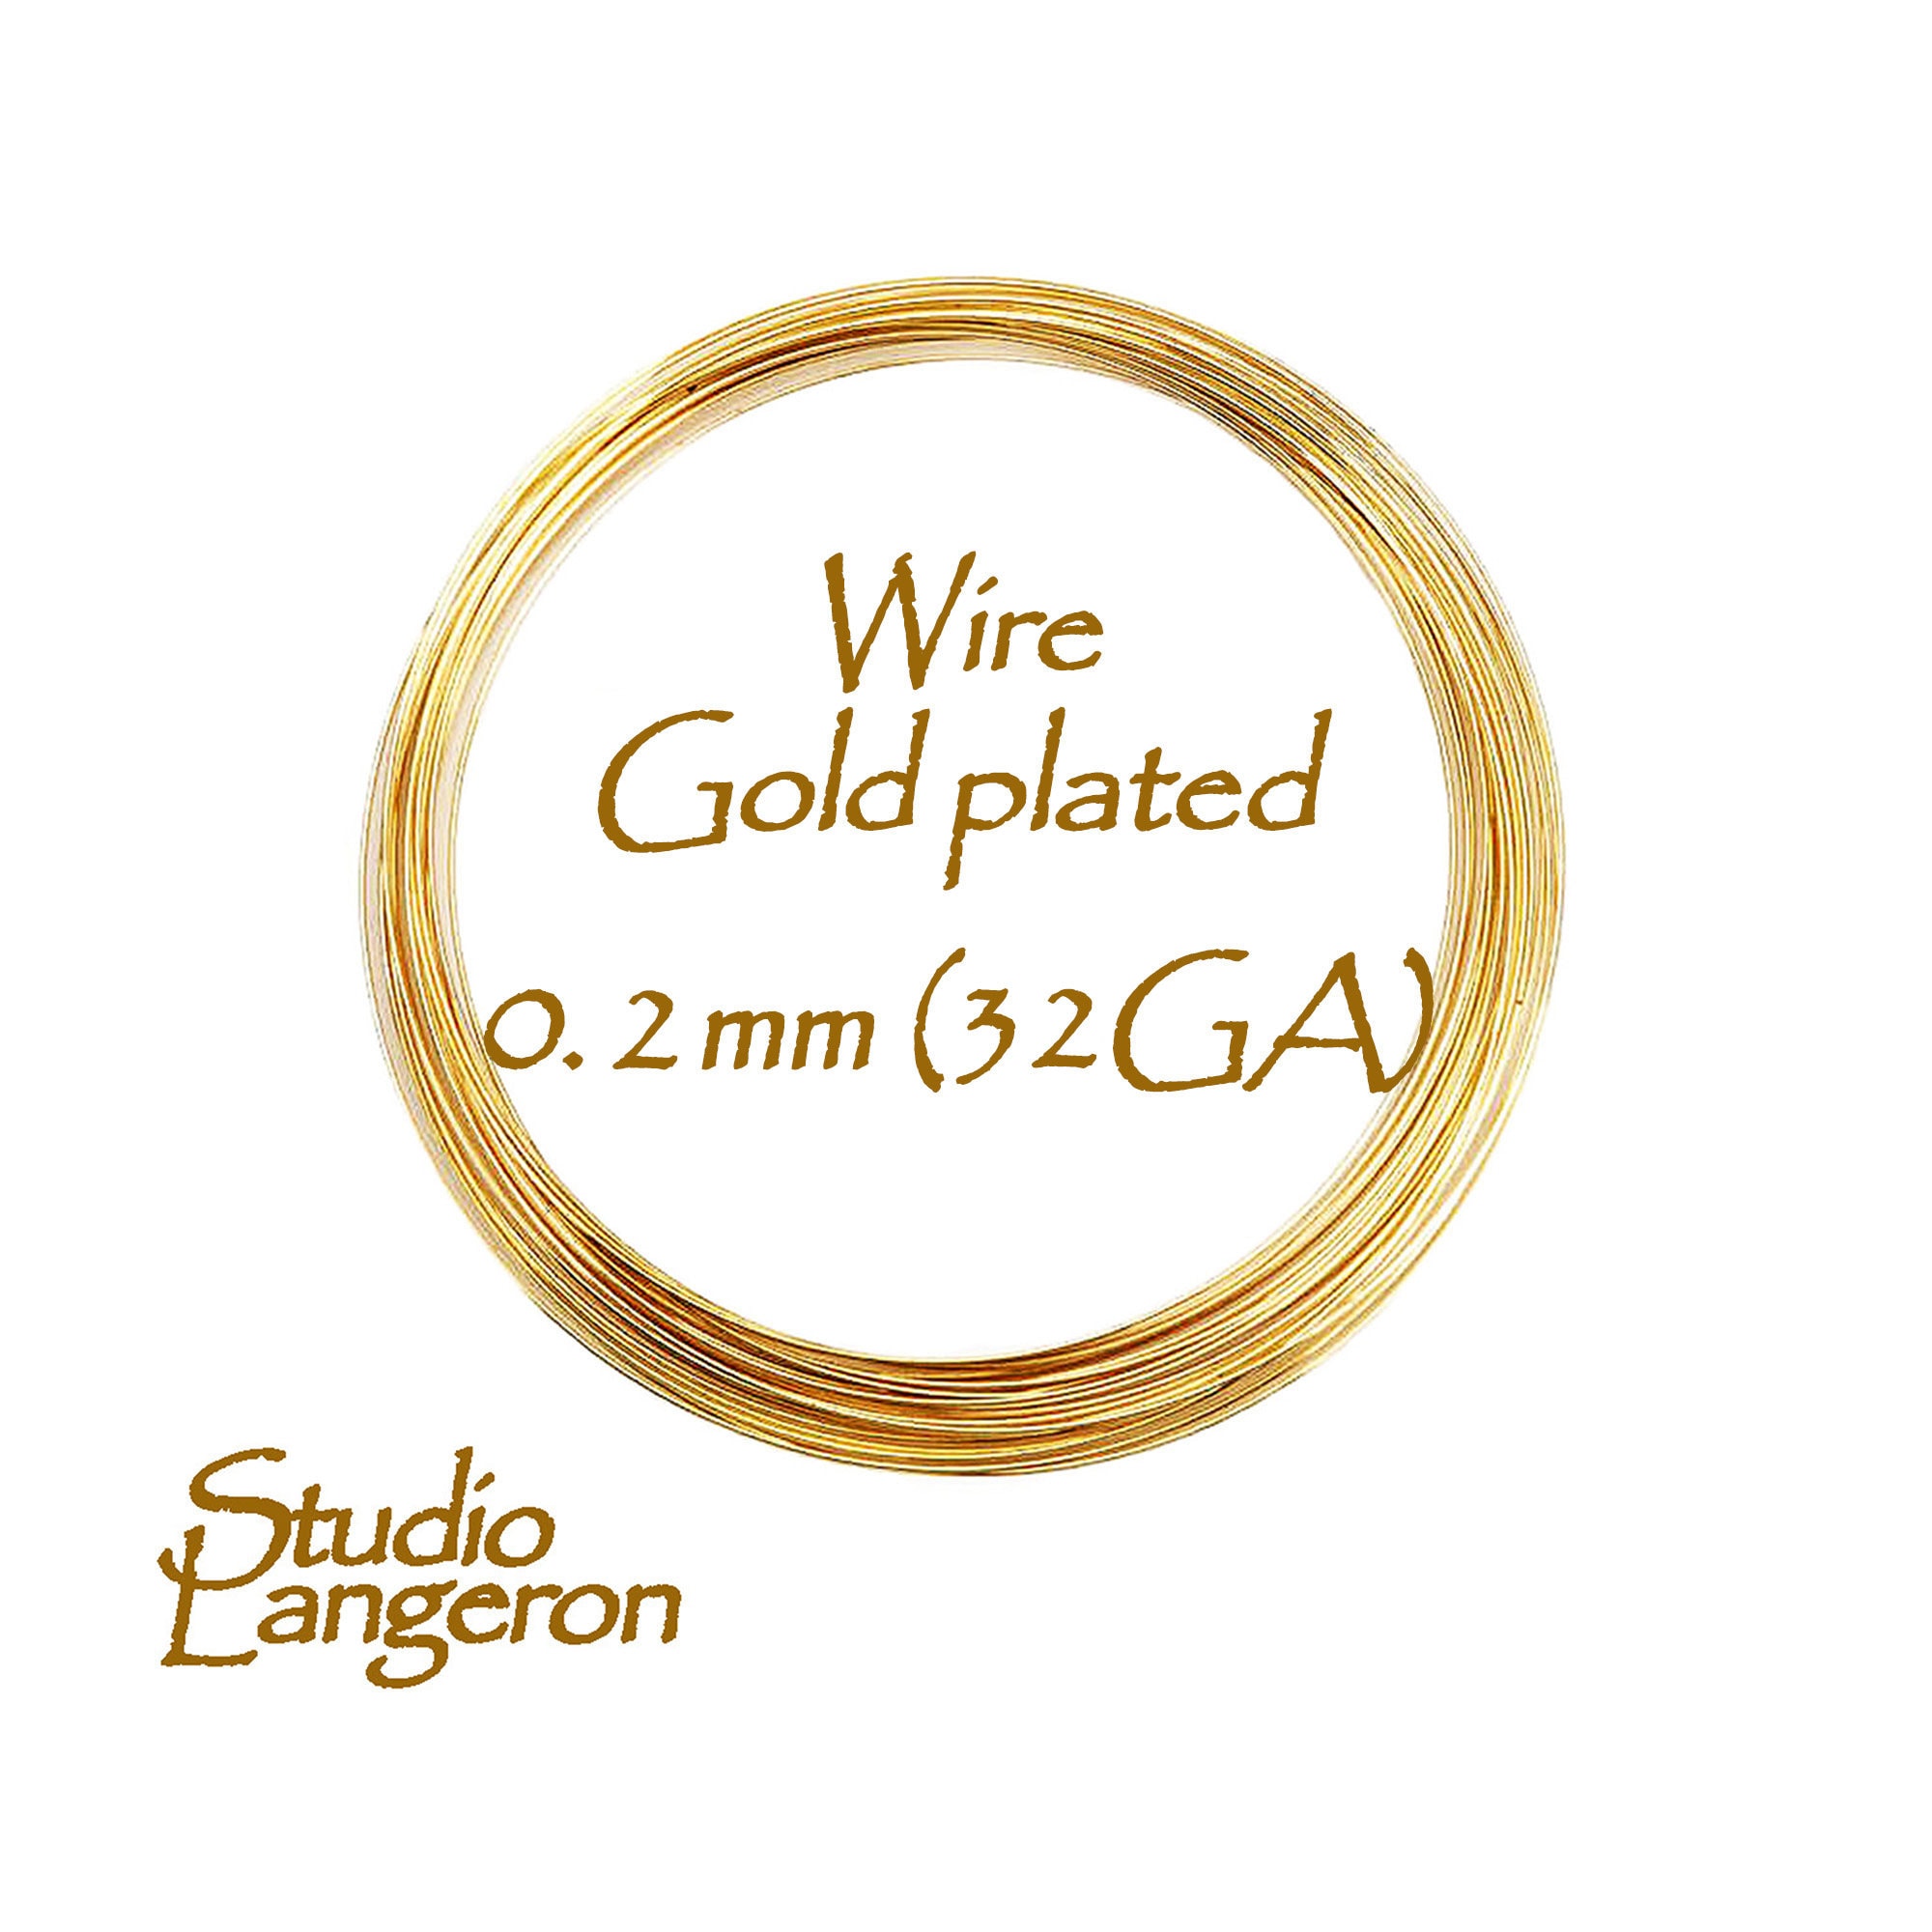 Lauw toewijzen ui 9.0 Meters 30 Ft Gold Plated Wire 32 Gauge Wire Wire - Etsy